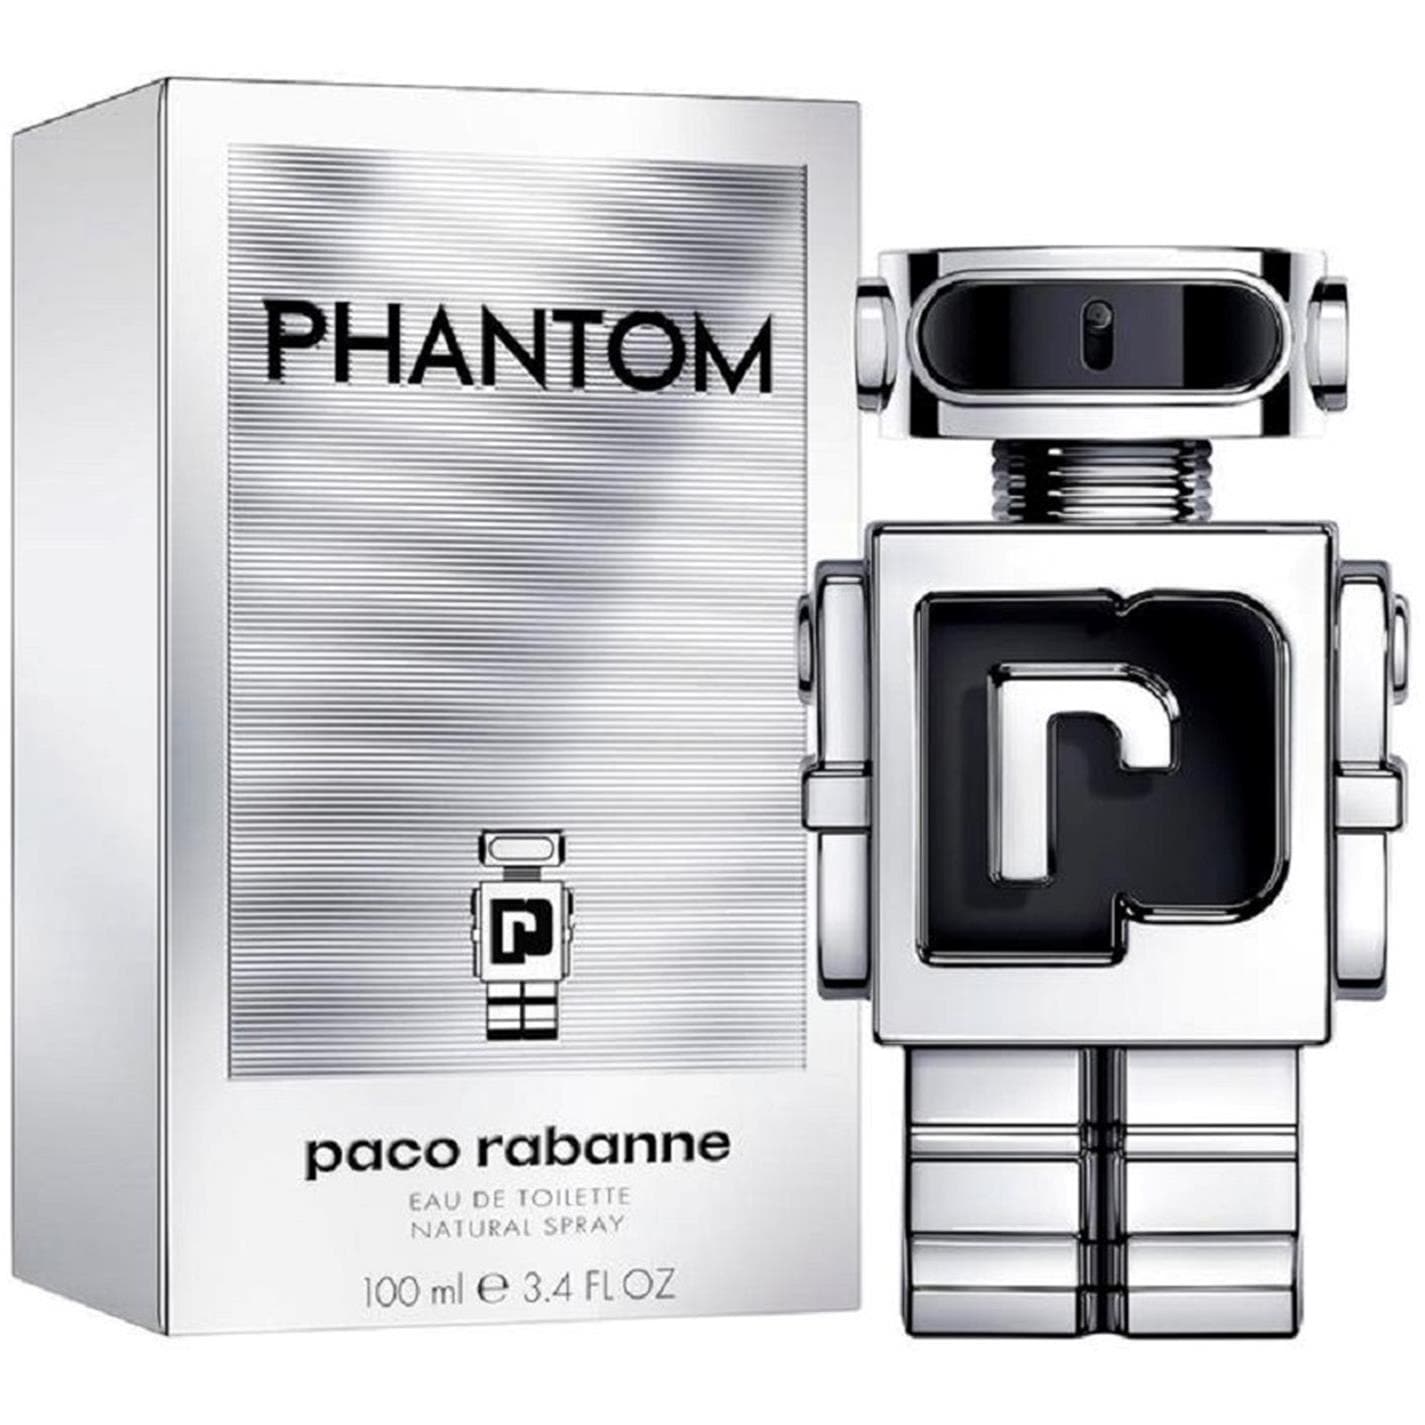 Paco Rabanne Phantom Eau De Toilette For Him 100ml Spray Phantom by Paco Rabanne is a Woody Aromatic fragrance for men. This is a new fragrance. Phantom was launched in 2021. Phantom was created by Anne Flipo, Dominique Ropion, Loc Dong and Juliette Karagueuzoglou.